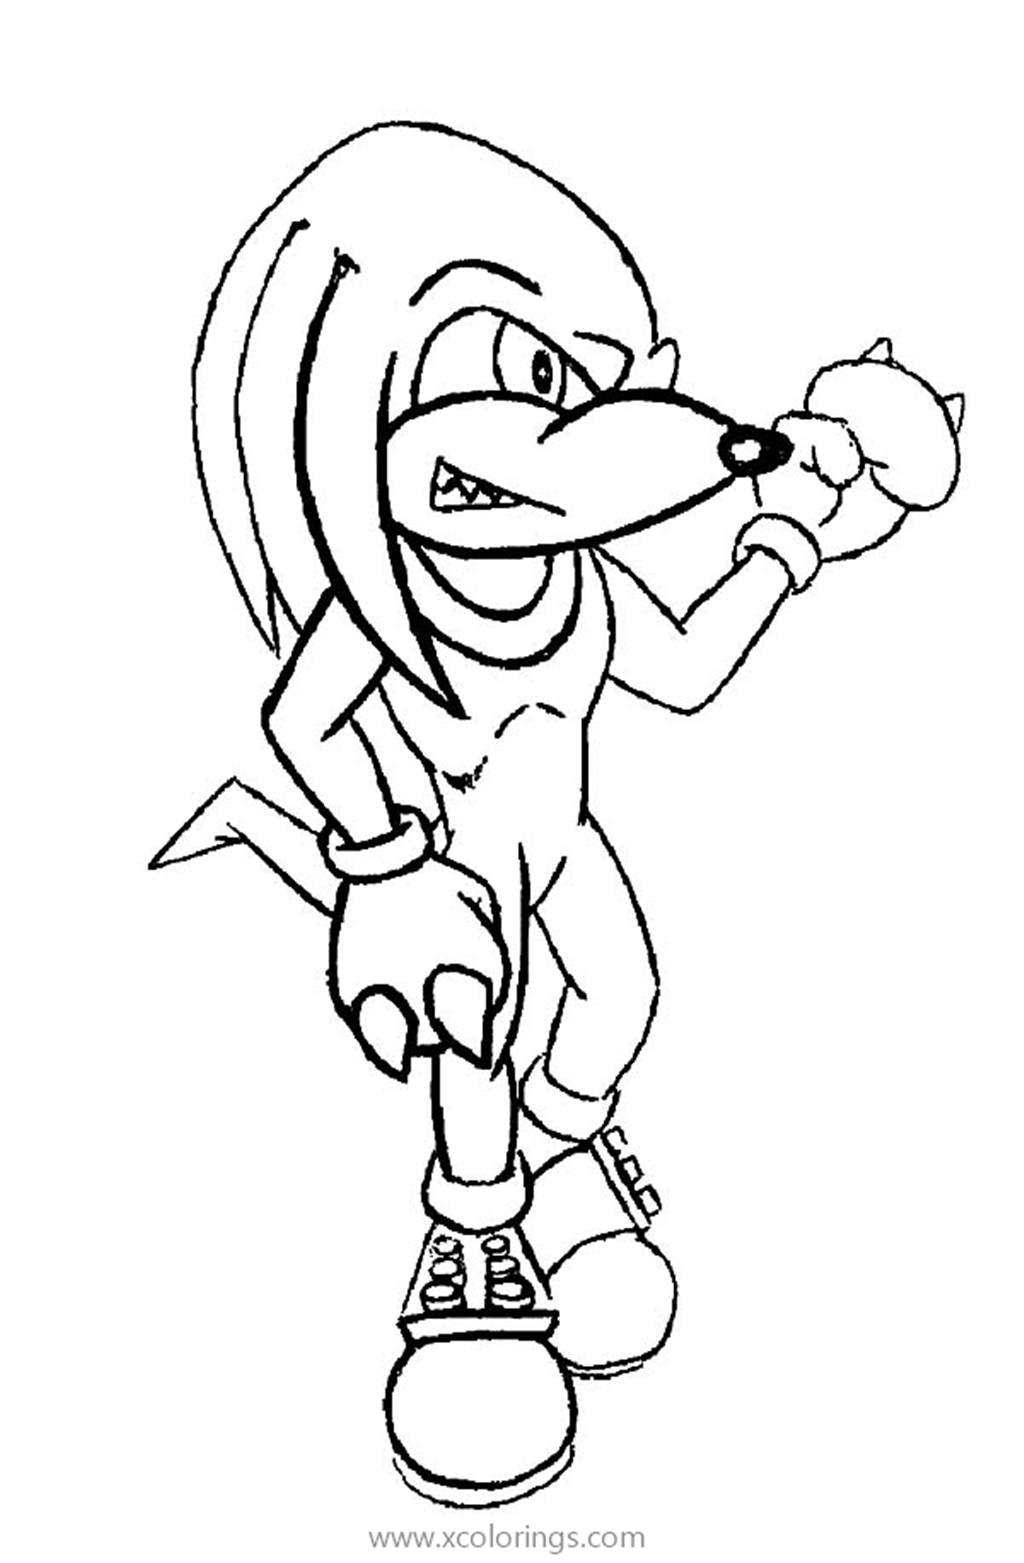 Character Knuckles The Echidna Coloring Pages - XColorings.com